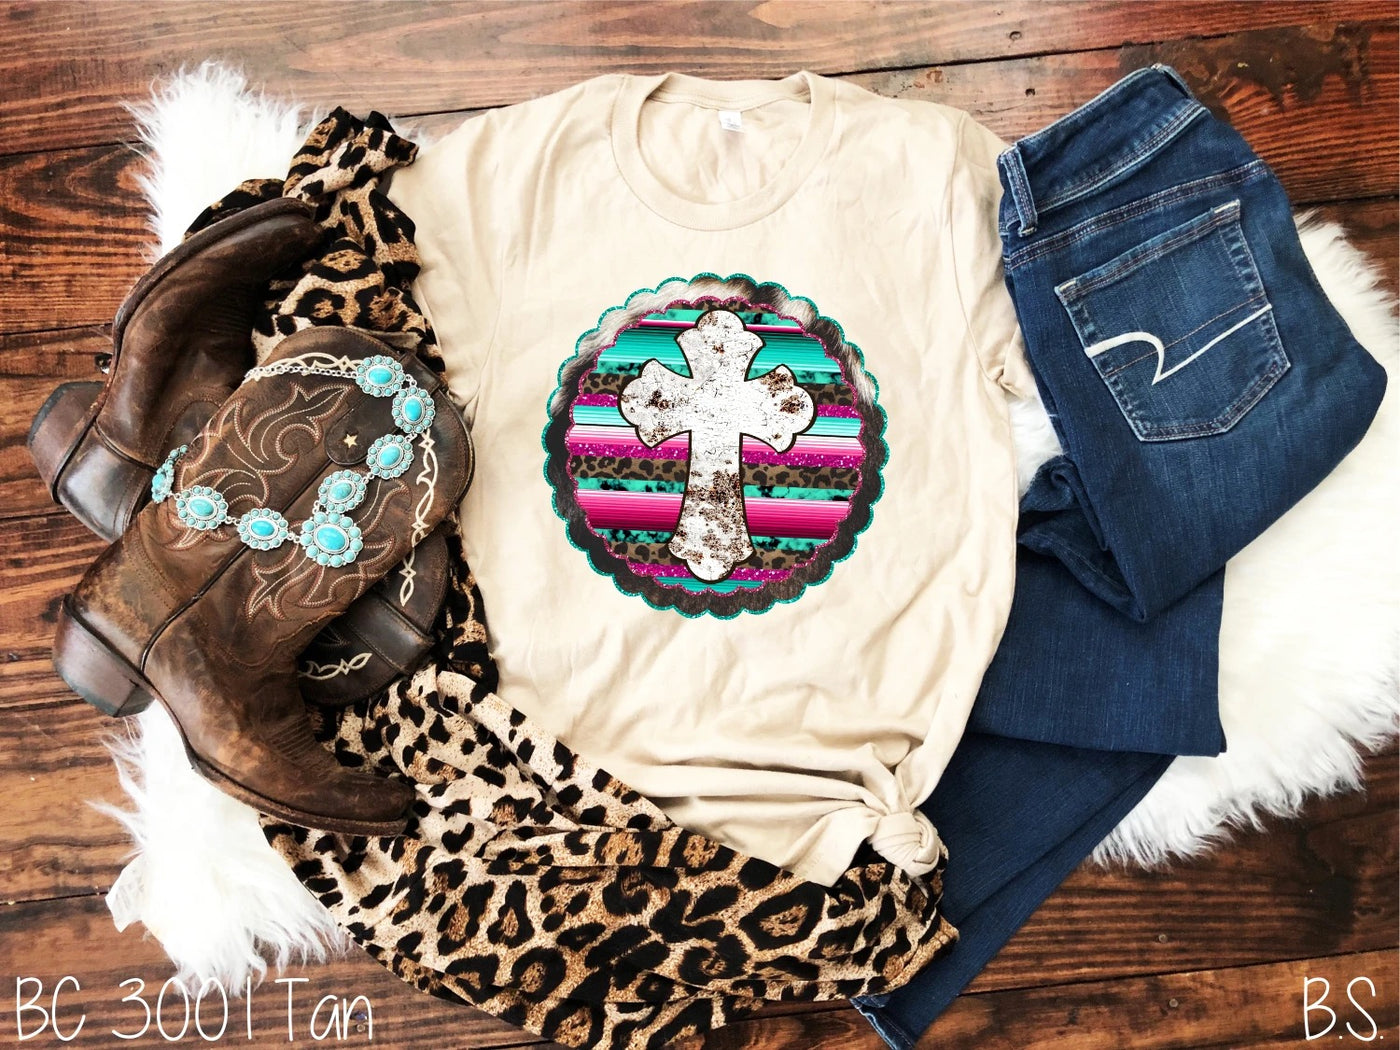 Super soft graphic tee featuring a chippy white cross on a leopard print, pink and teal serape pattern background with glitter effect, and a scalloped cowhide outline. The perfect country western t-shirt to show your faith. 